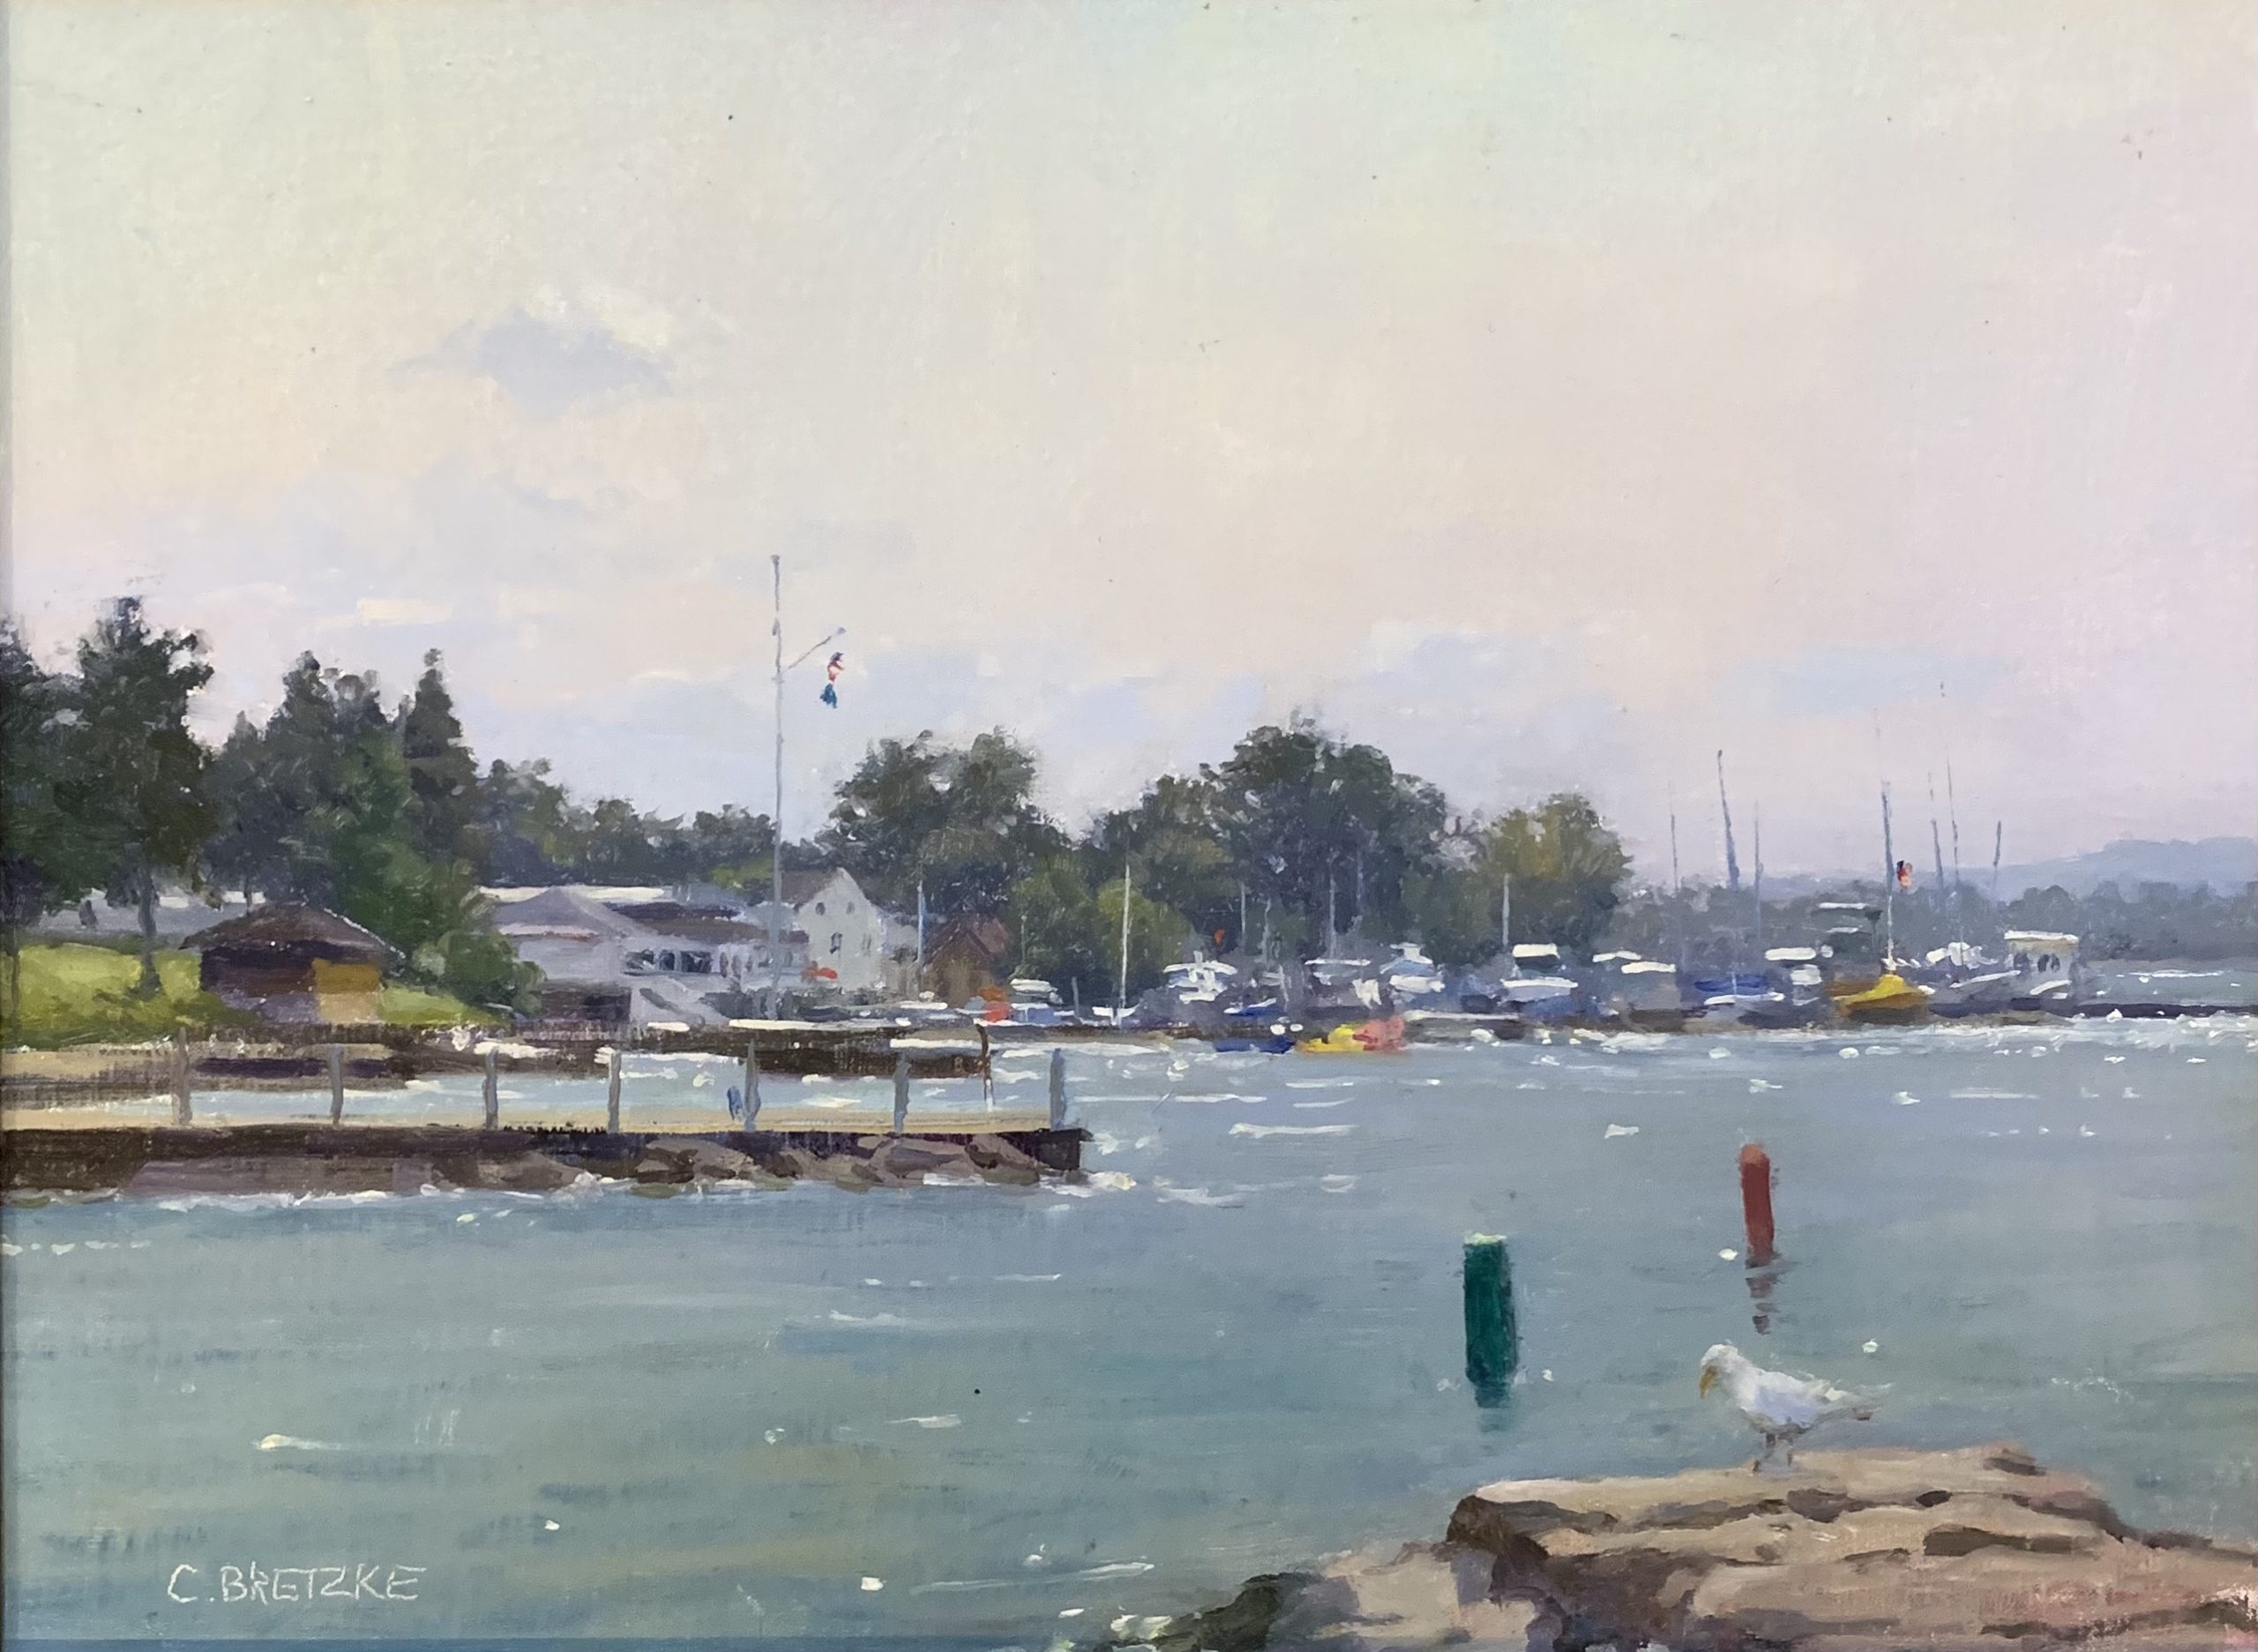 Carl Bretzke, “Yacht Club View,” oil on linen, 12 x 16 in., private collection